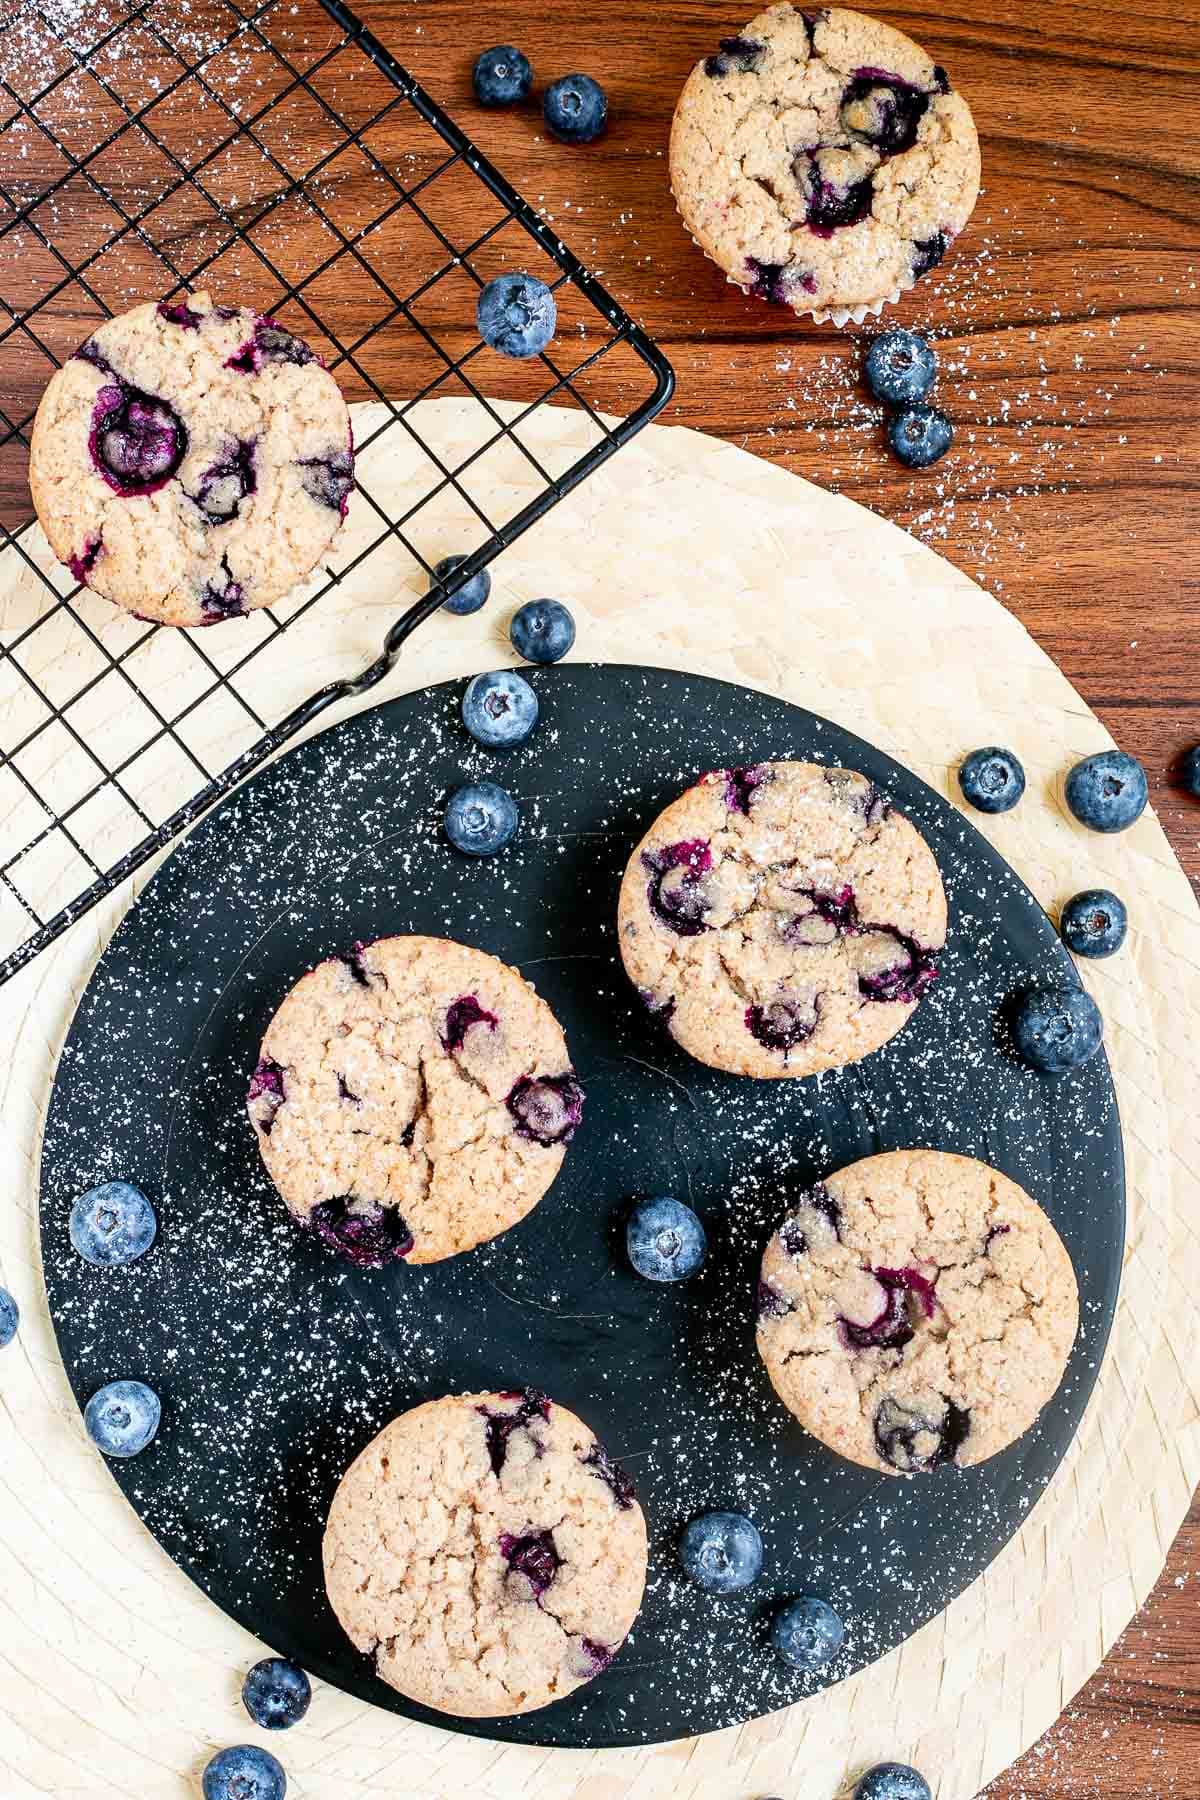 Blueberry muffins on a black board dusted with powdered sugar and surrounded by fresh bluberries.